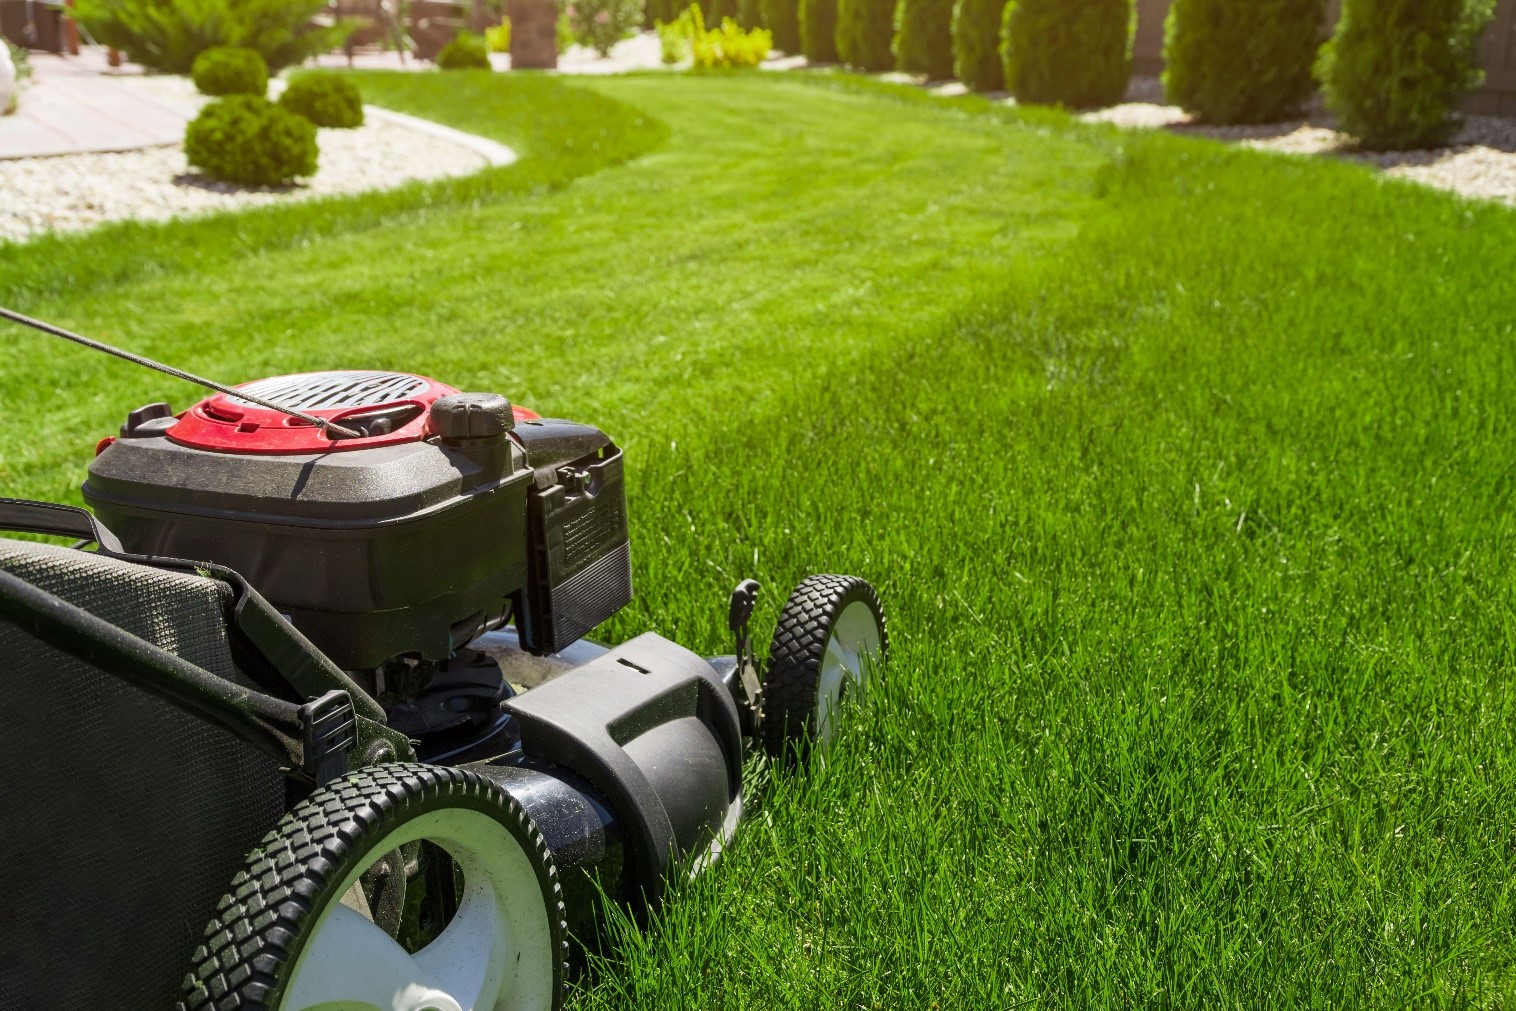 lawnmower cutting grass - What Fuel Should I Use in My Lawn Mower?